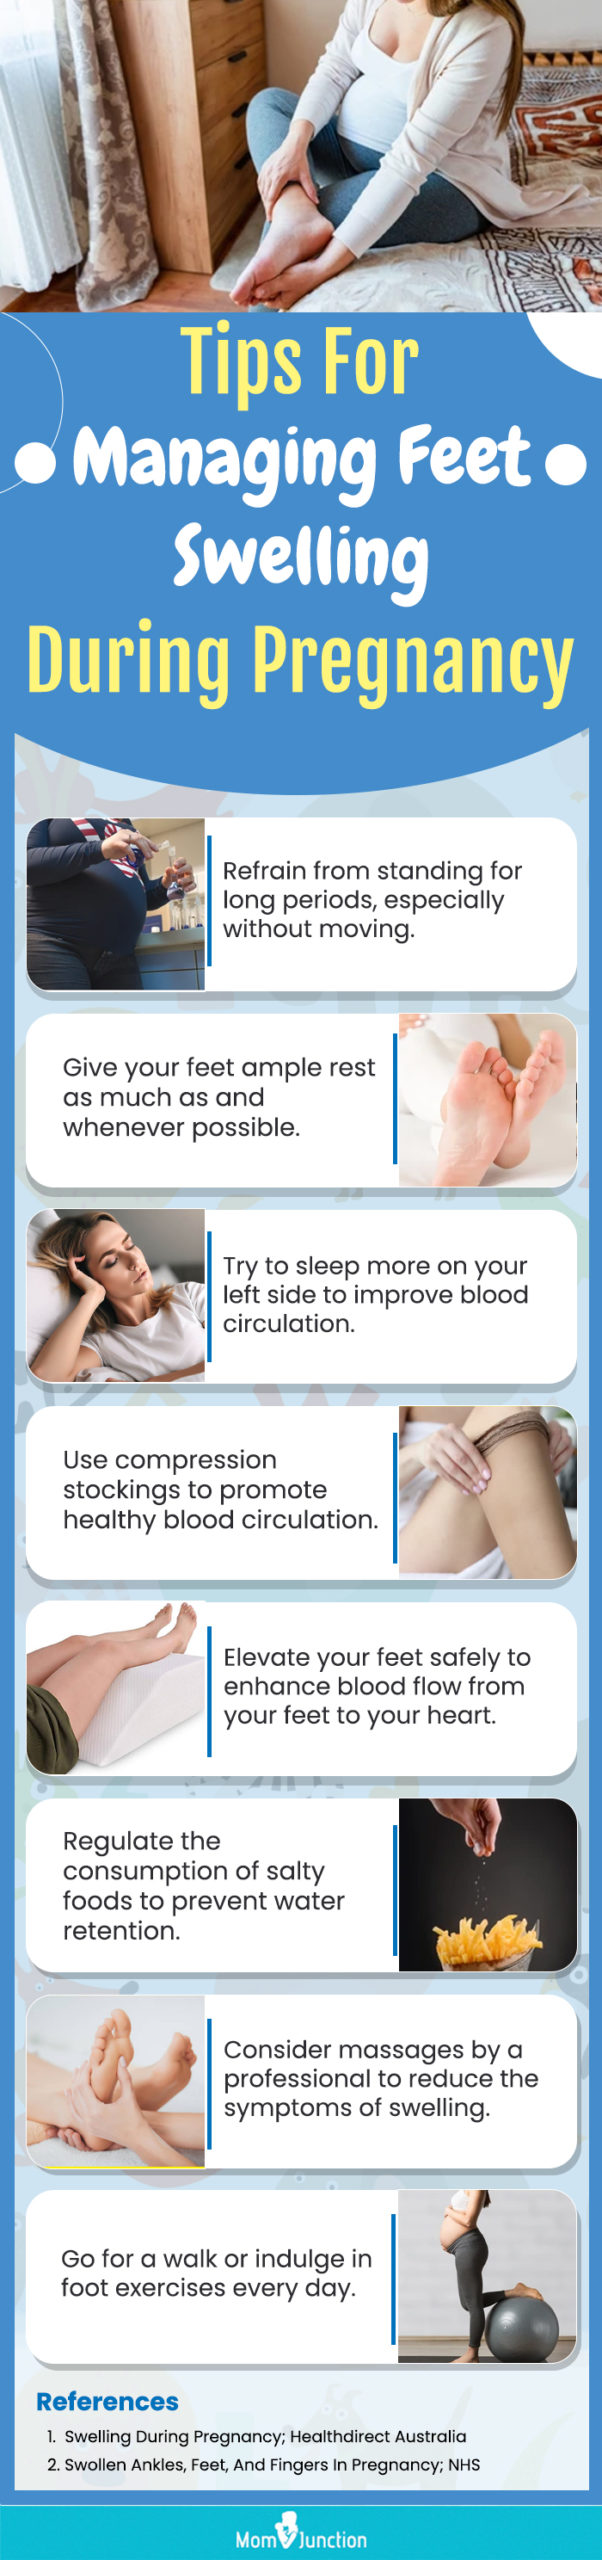 Tip For Managing Feet Swelling During Pregnancy (infographic)